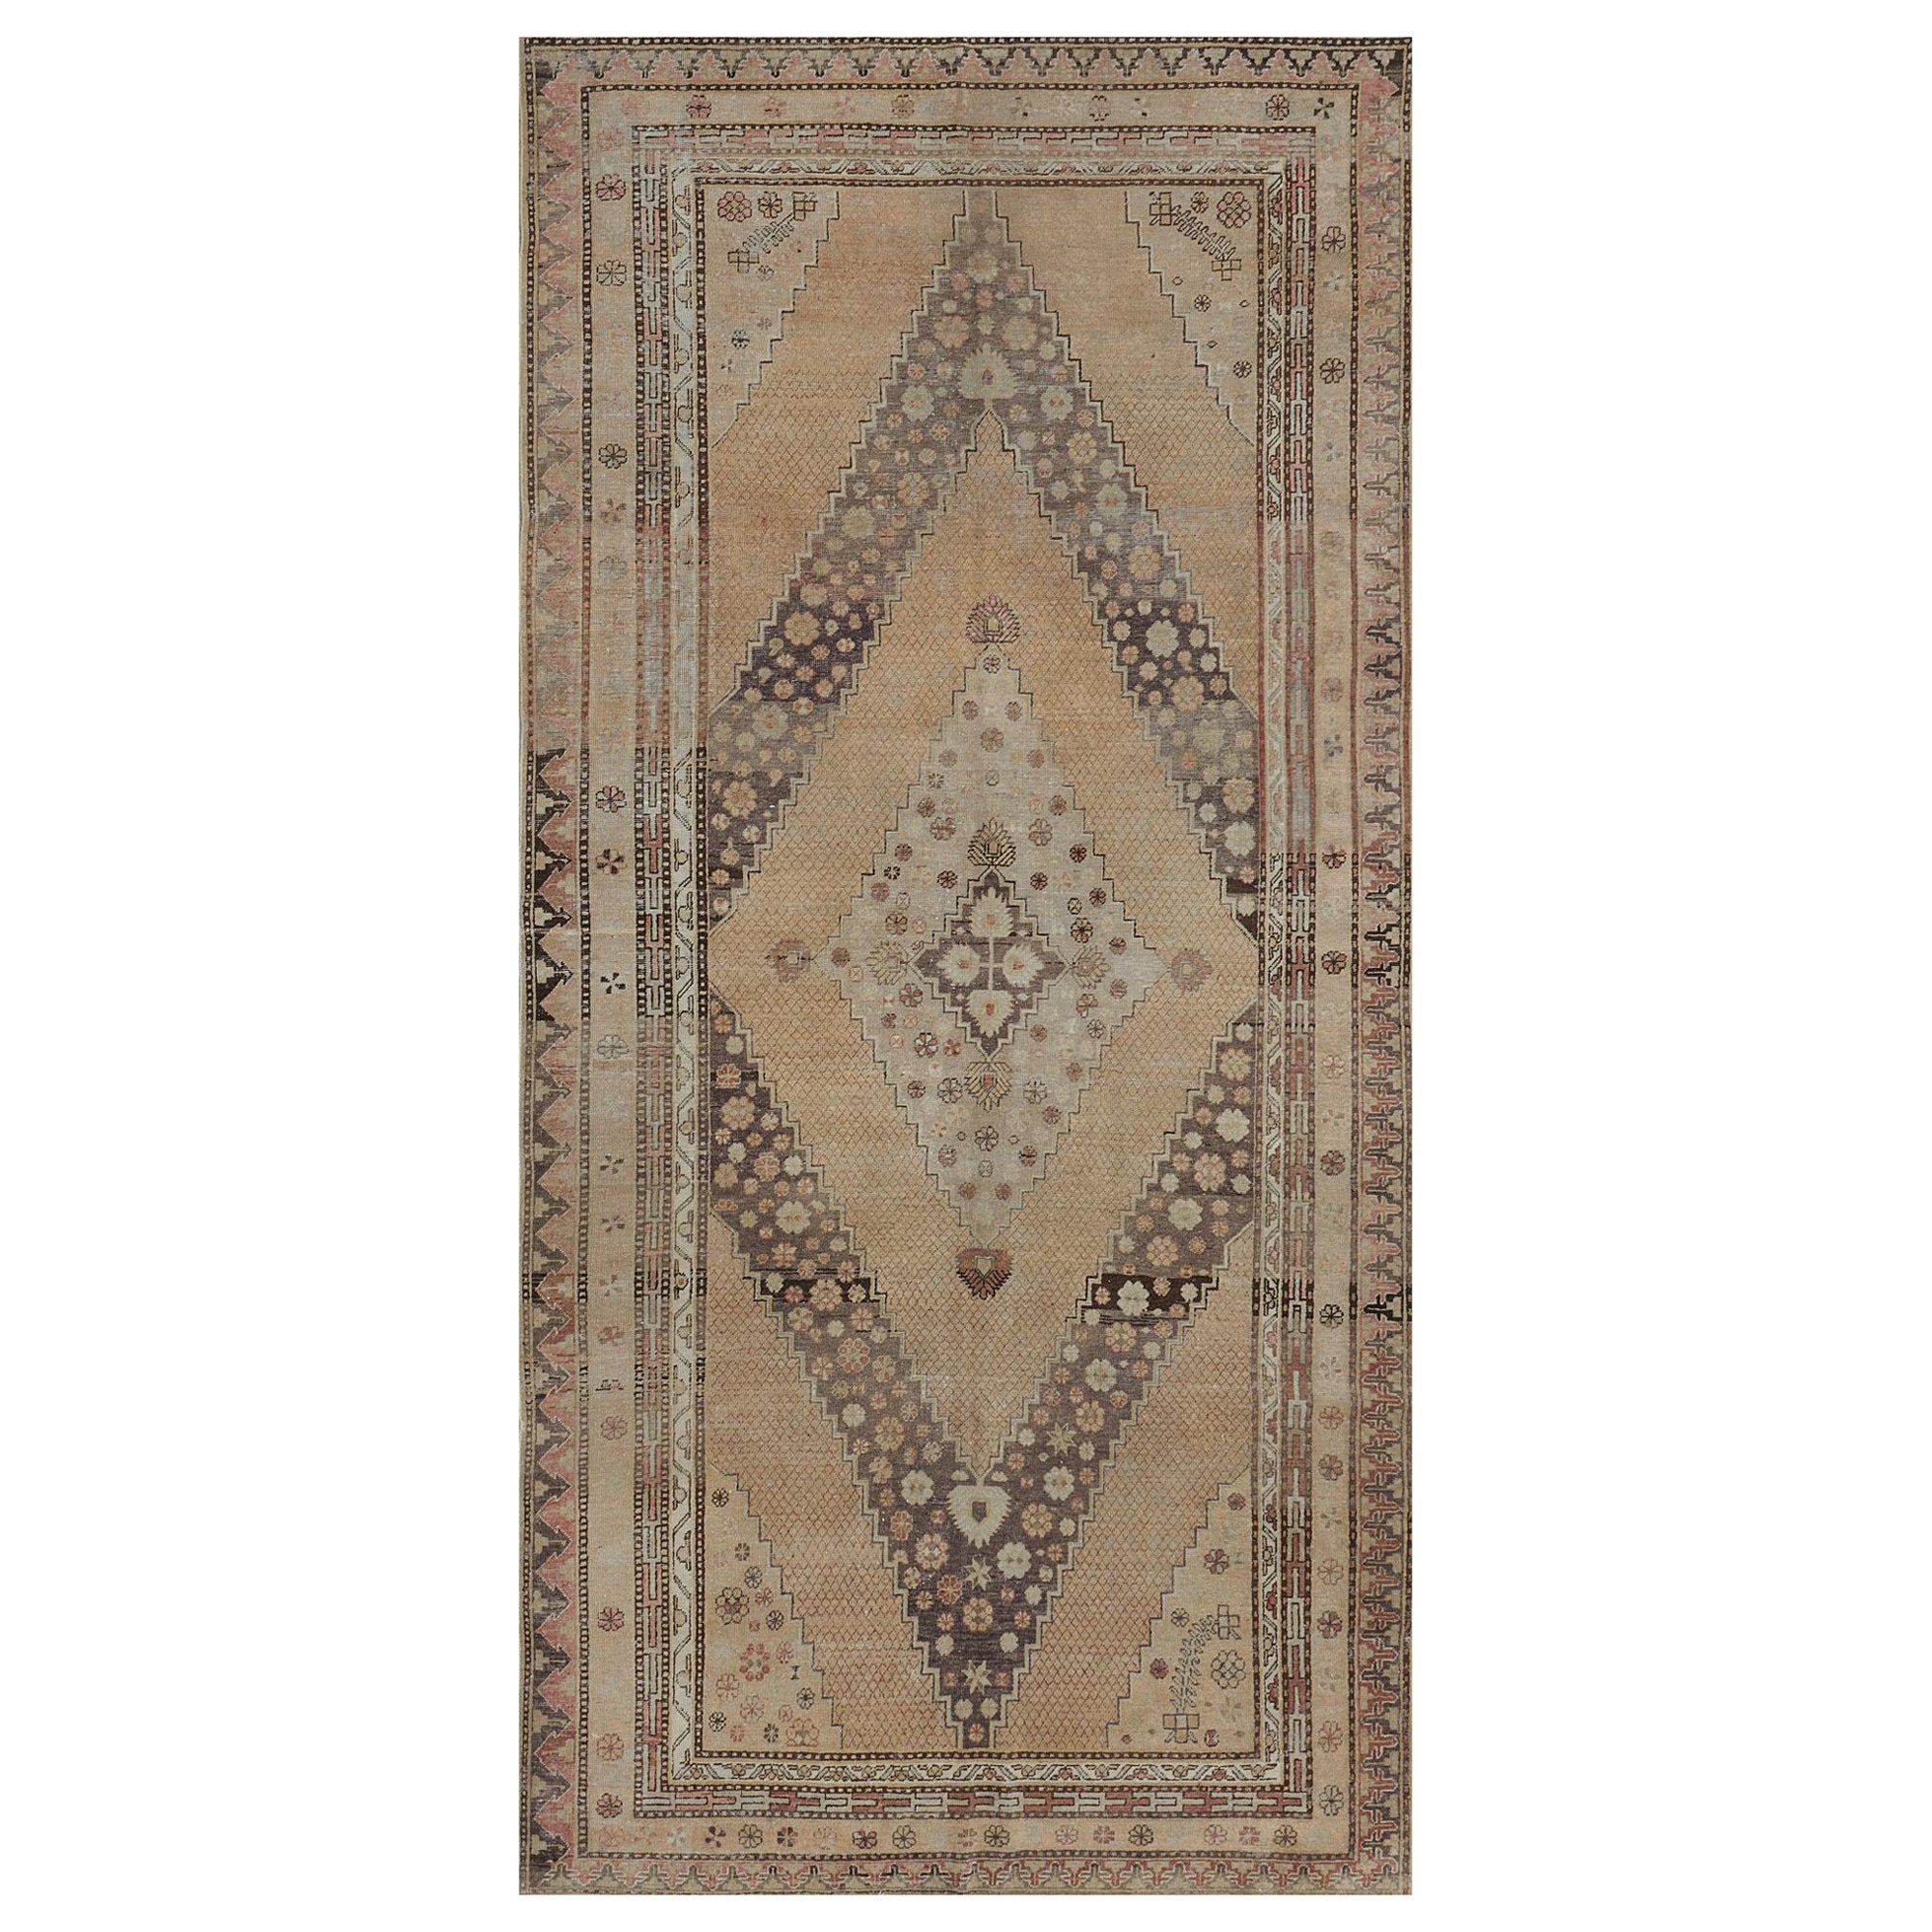 Antique Turn-of-the-Century Handknotted  Khotan Rug For Sale